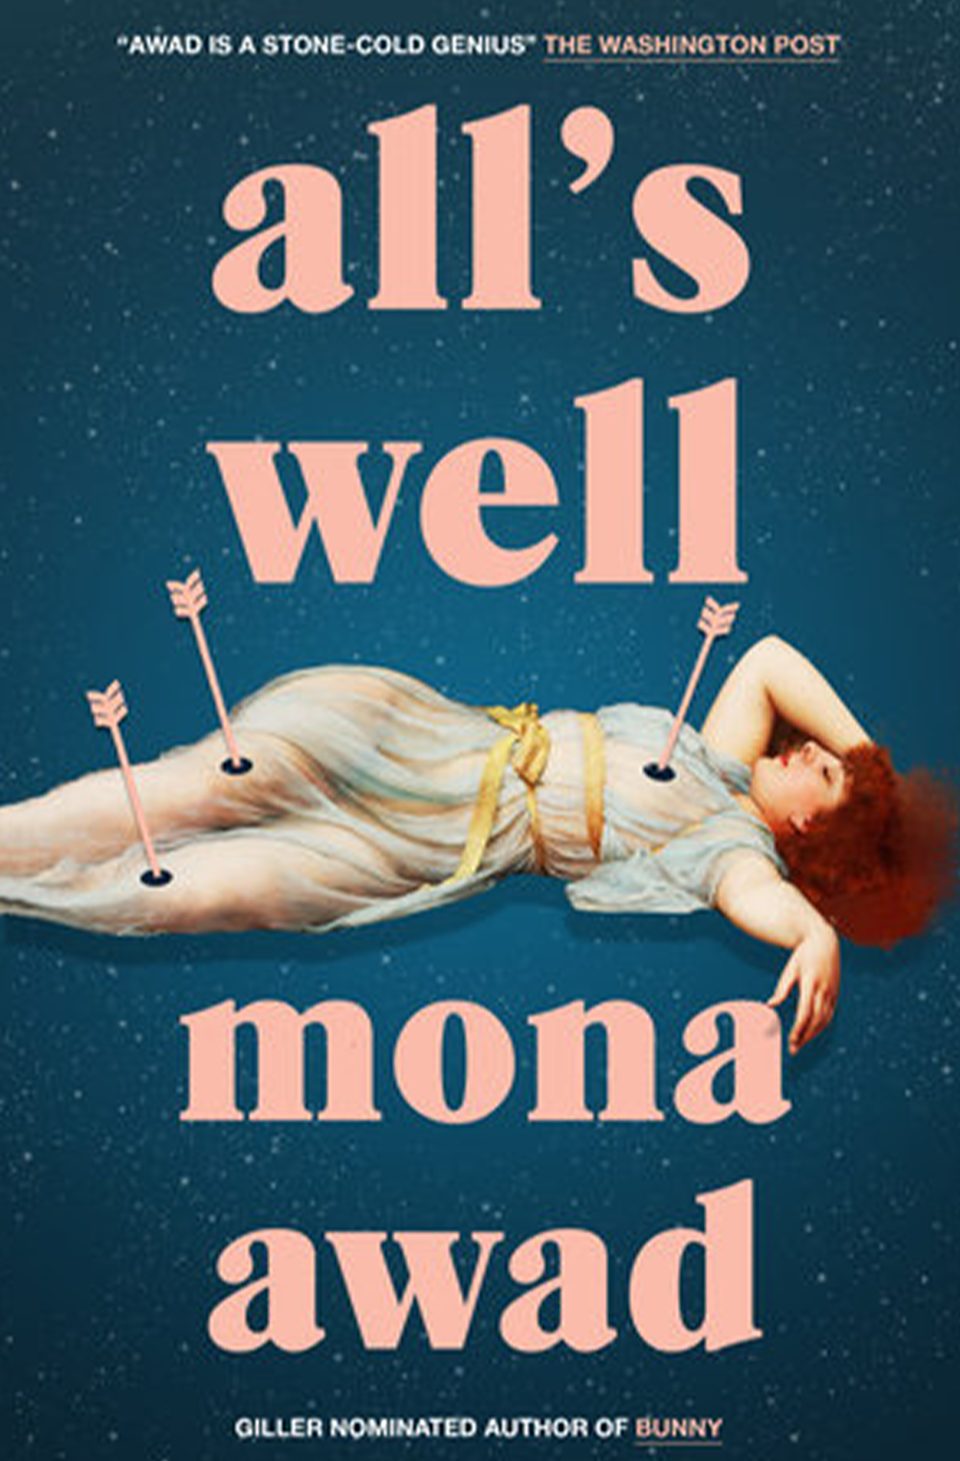 All's Well by Mona Awad